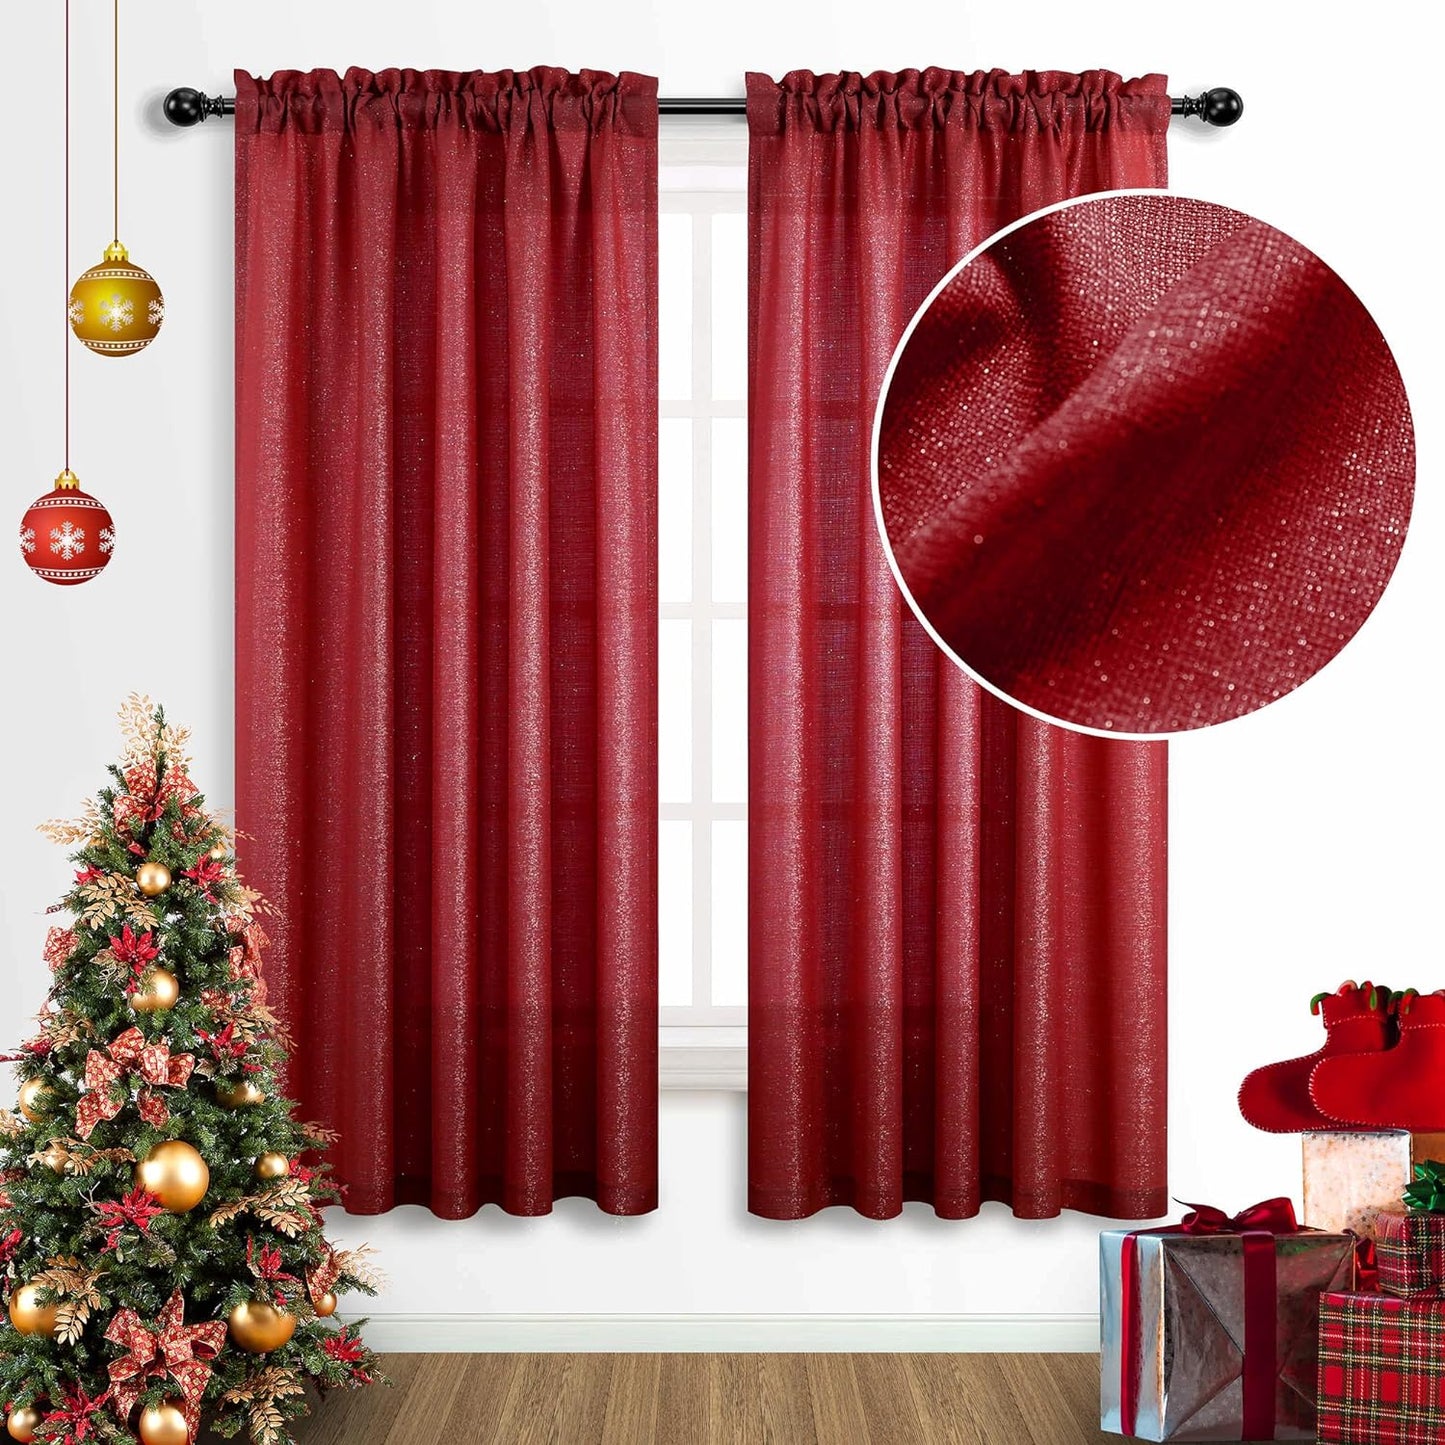 Gold Curtains 84 Inch Length for Living Room 2 Panels Set Rod Pocket Window Decor Semi Sheer Luxury Sparkle Shimmer Shiny Glitter Brown Golden Mustard Curtains for Bedroom 52X84 Long Christmas Decor  MRS.NATURALL TEXTILE Red 52X63 